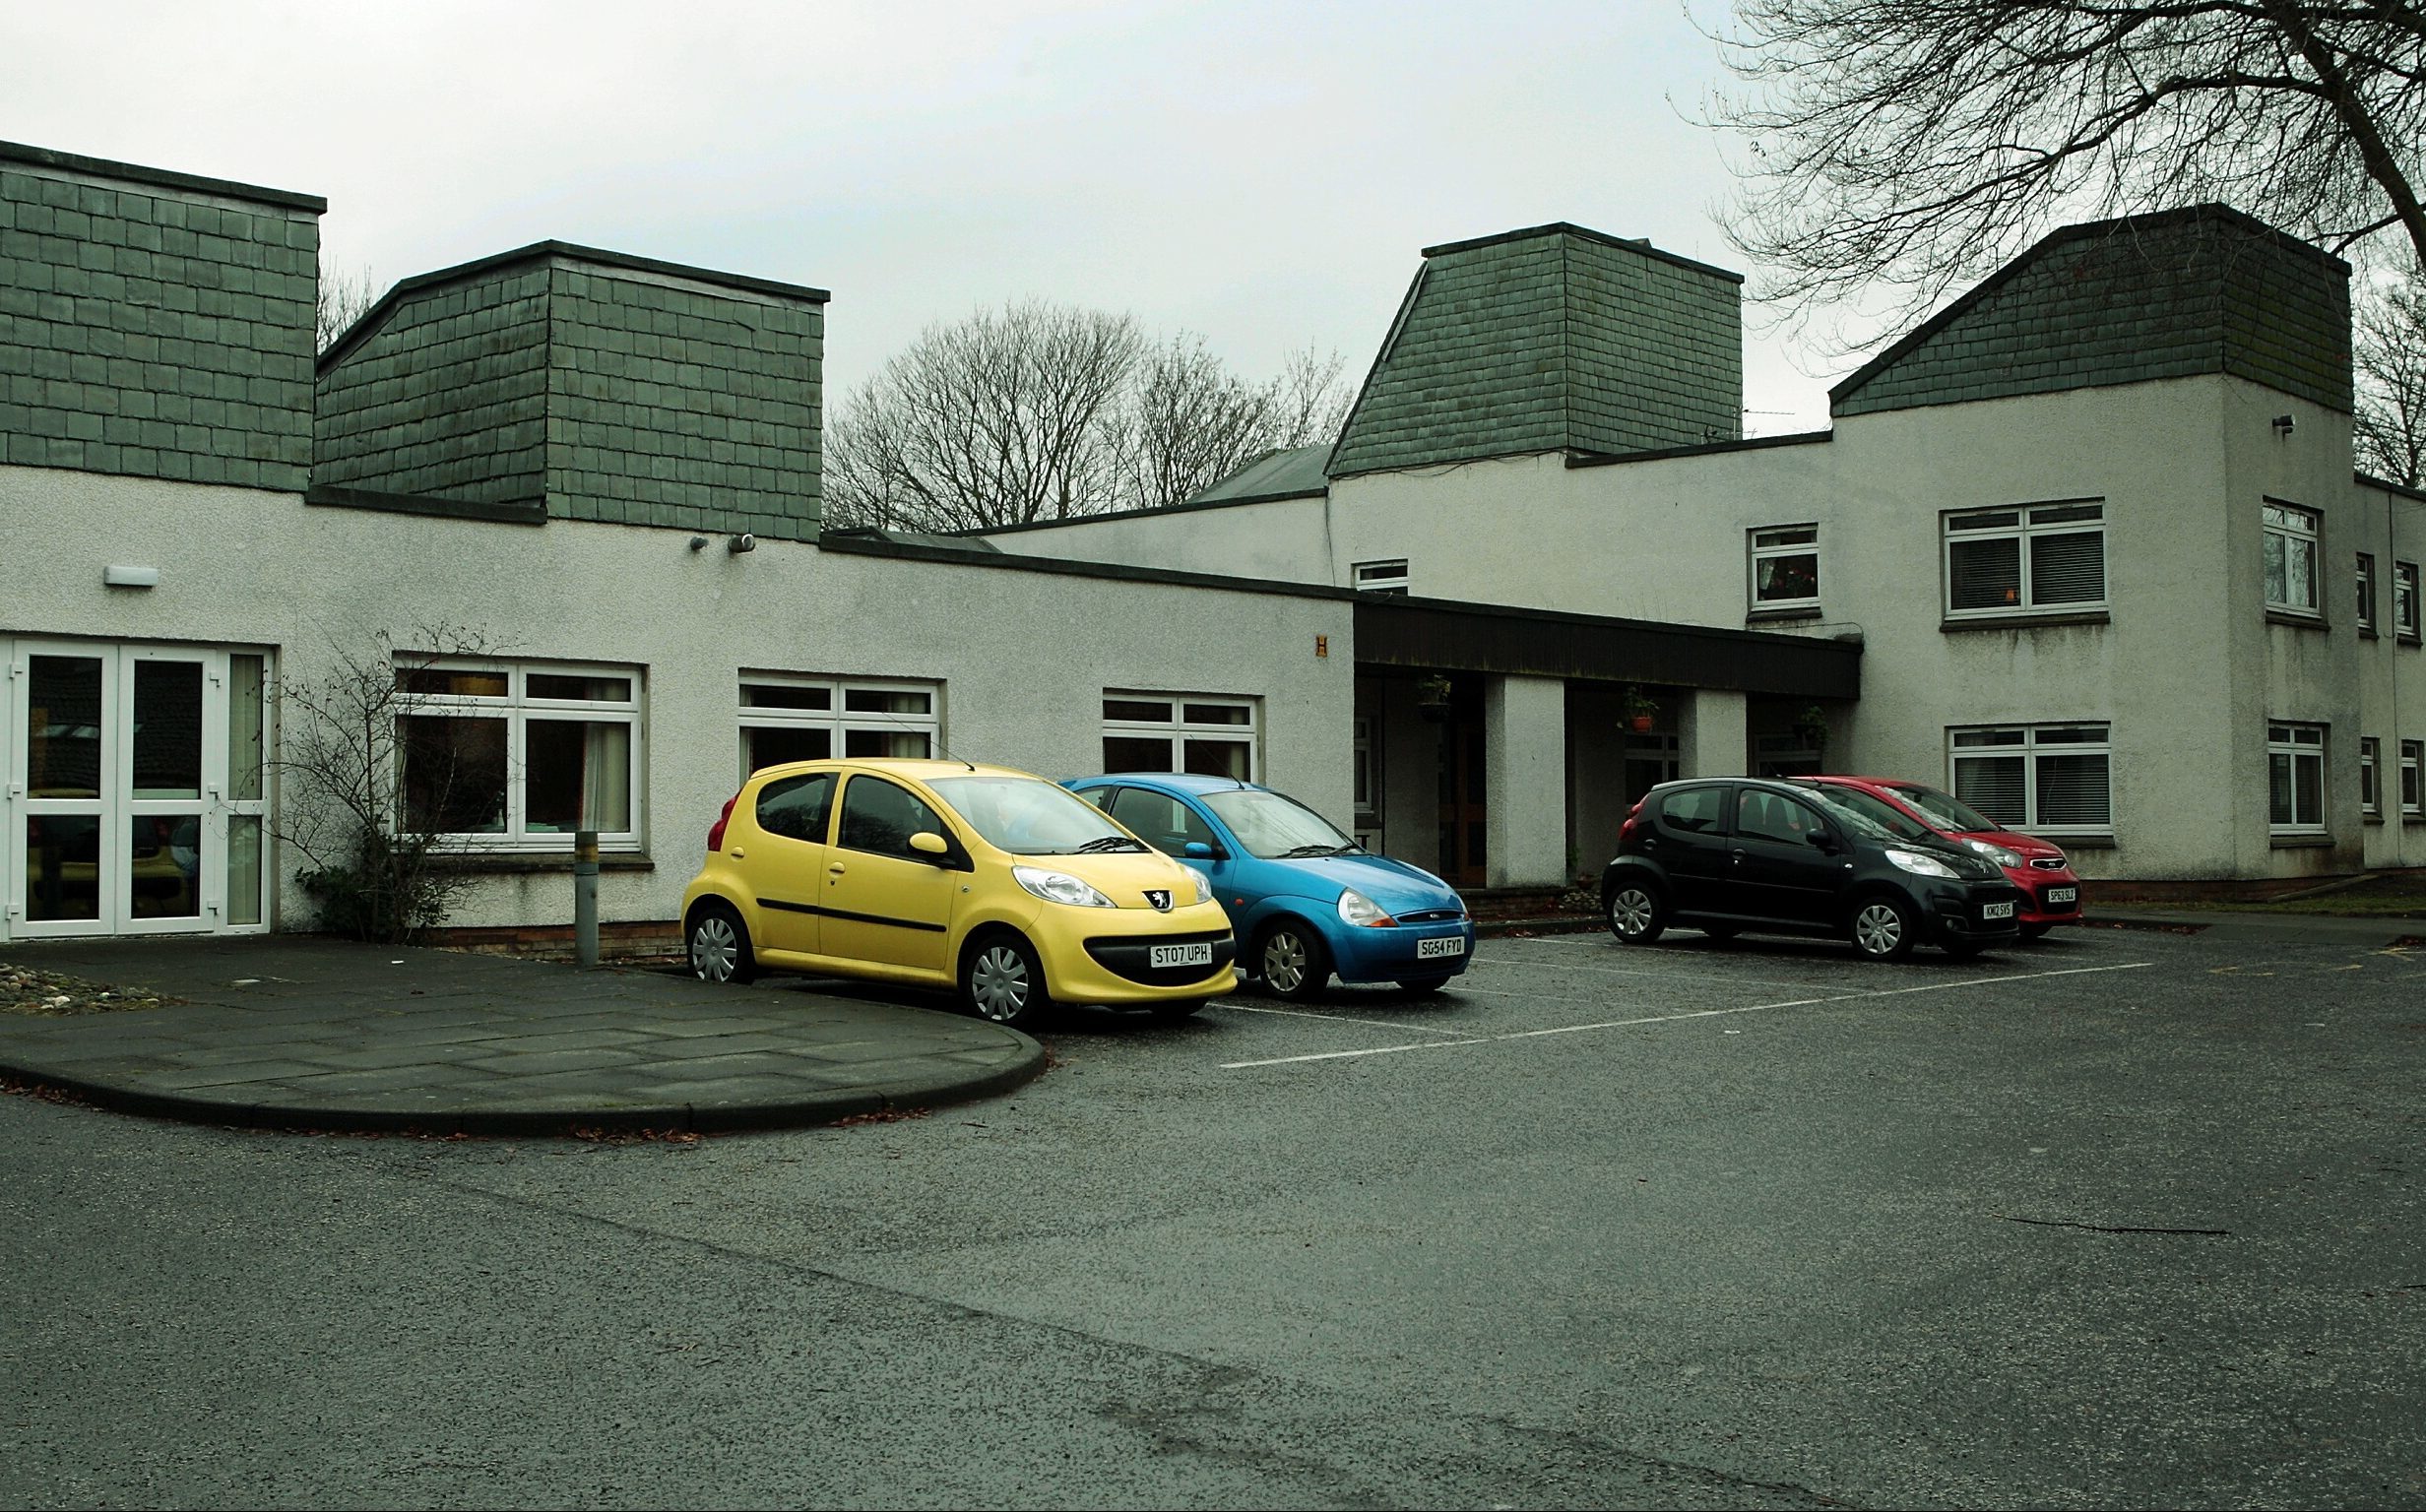 Raith Gates care home will be demolished to make way for a children's home